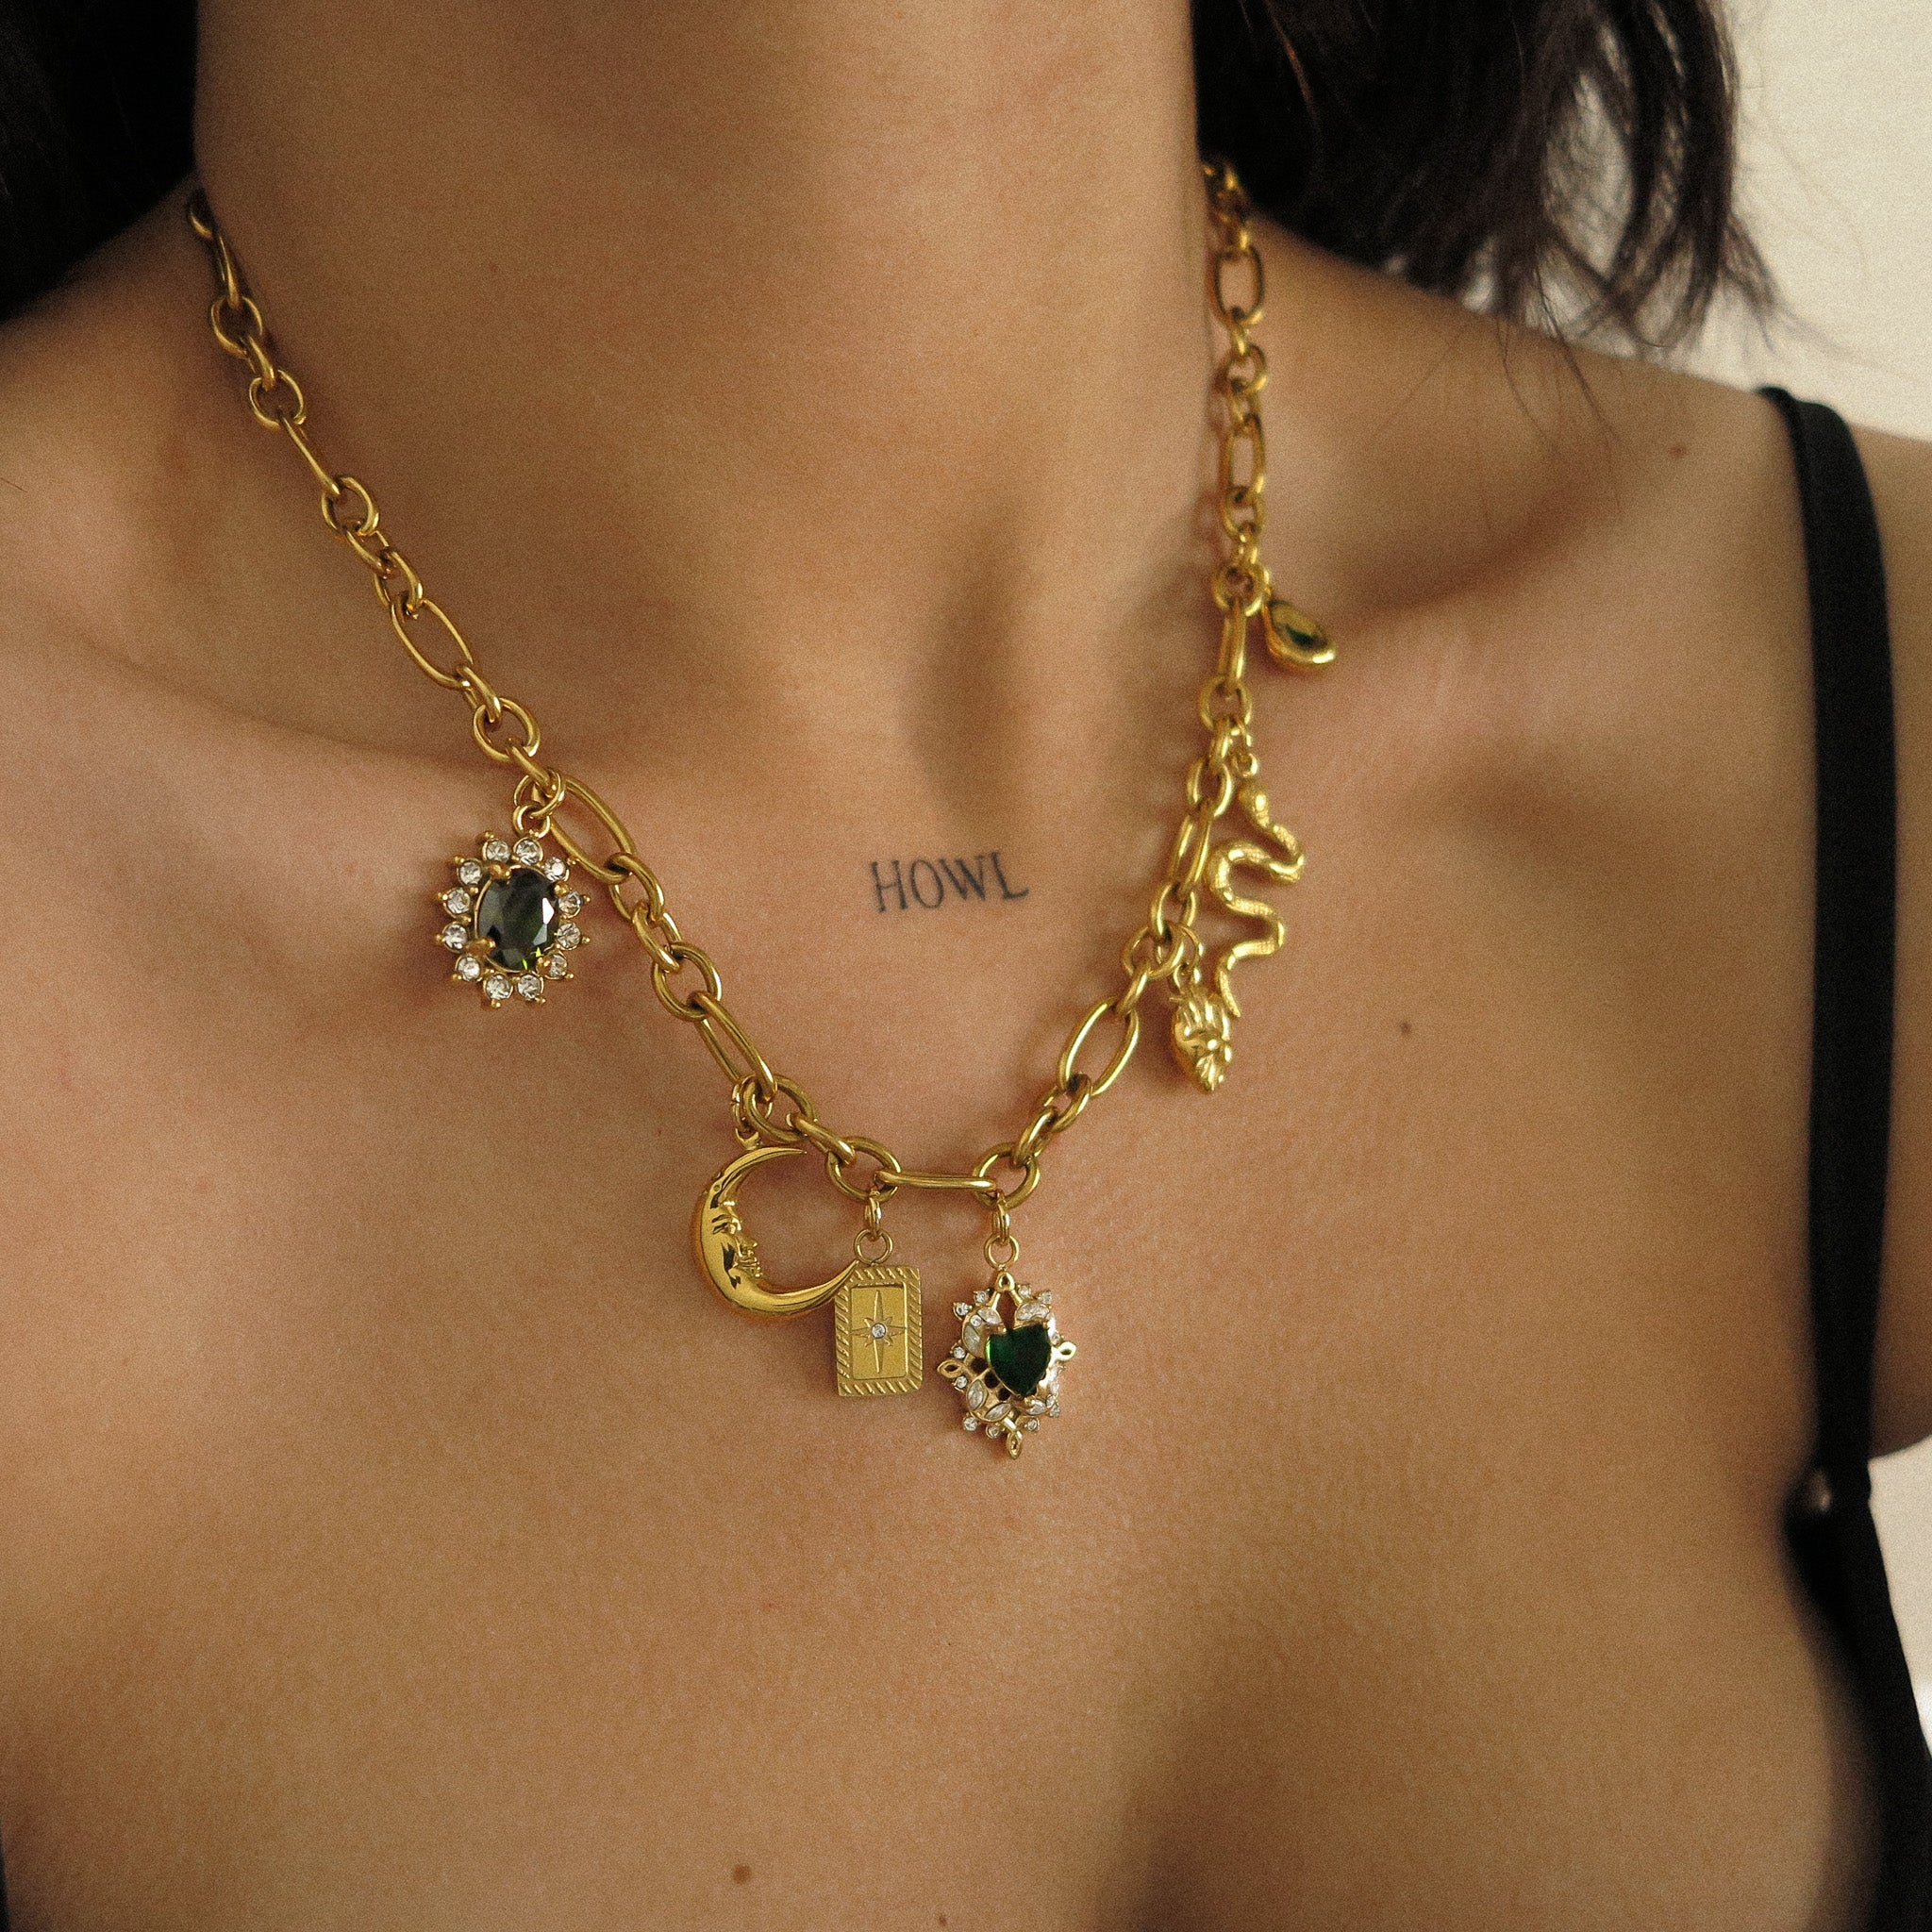 "Brie” Chunky Charm Necklace